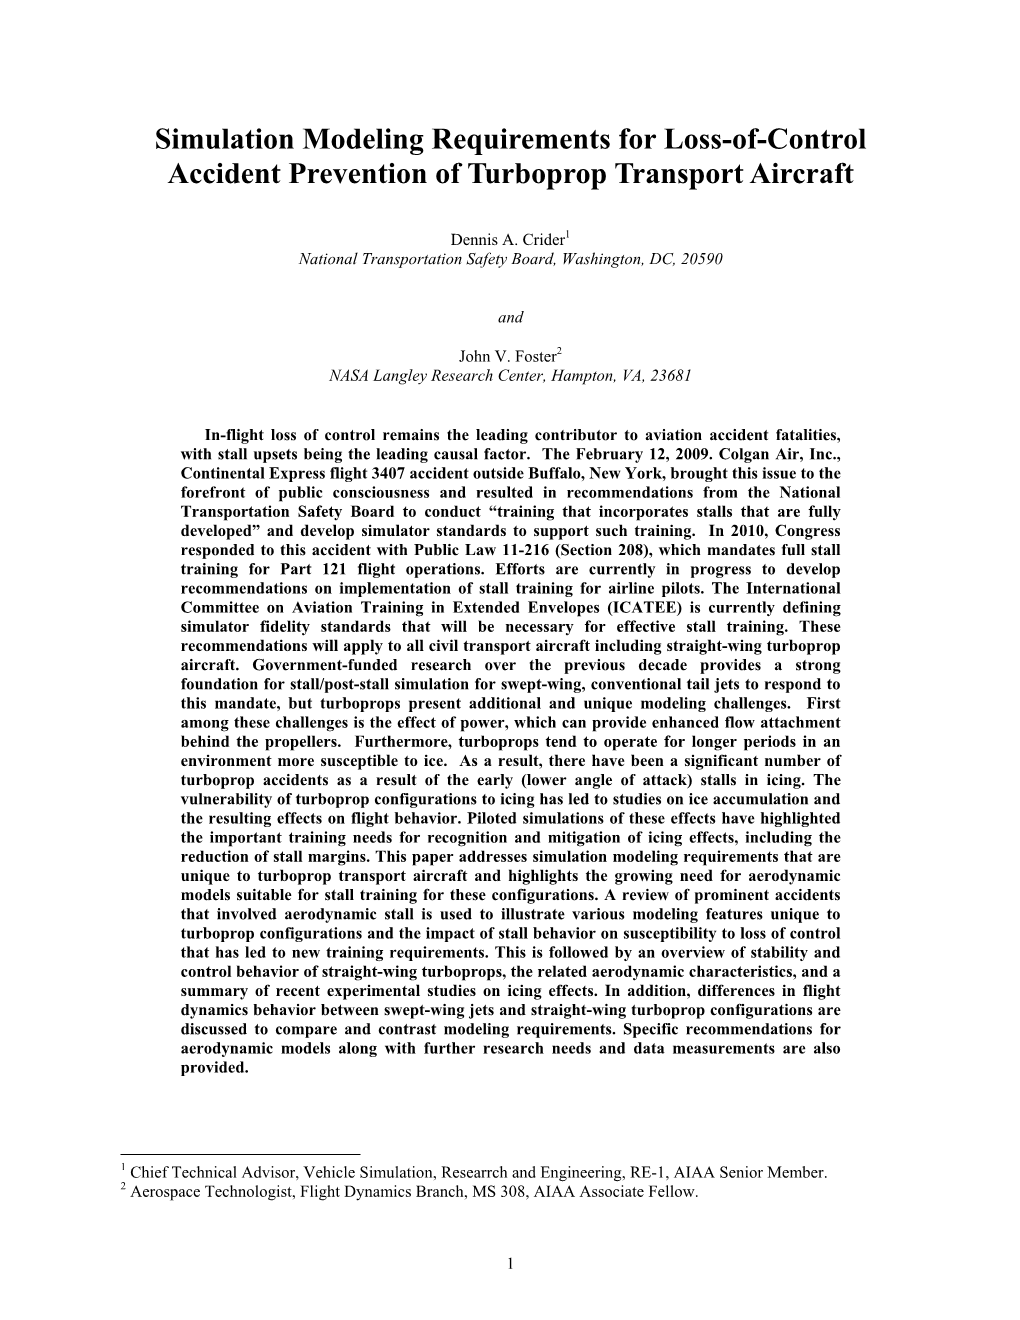 Simulation Modeling Requirements for Loss-Of-Control Accident Prevention of Turboprop Transport Aircraft